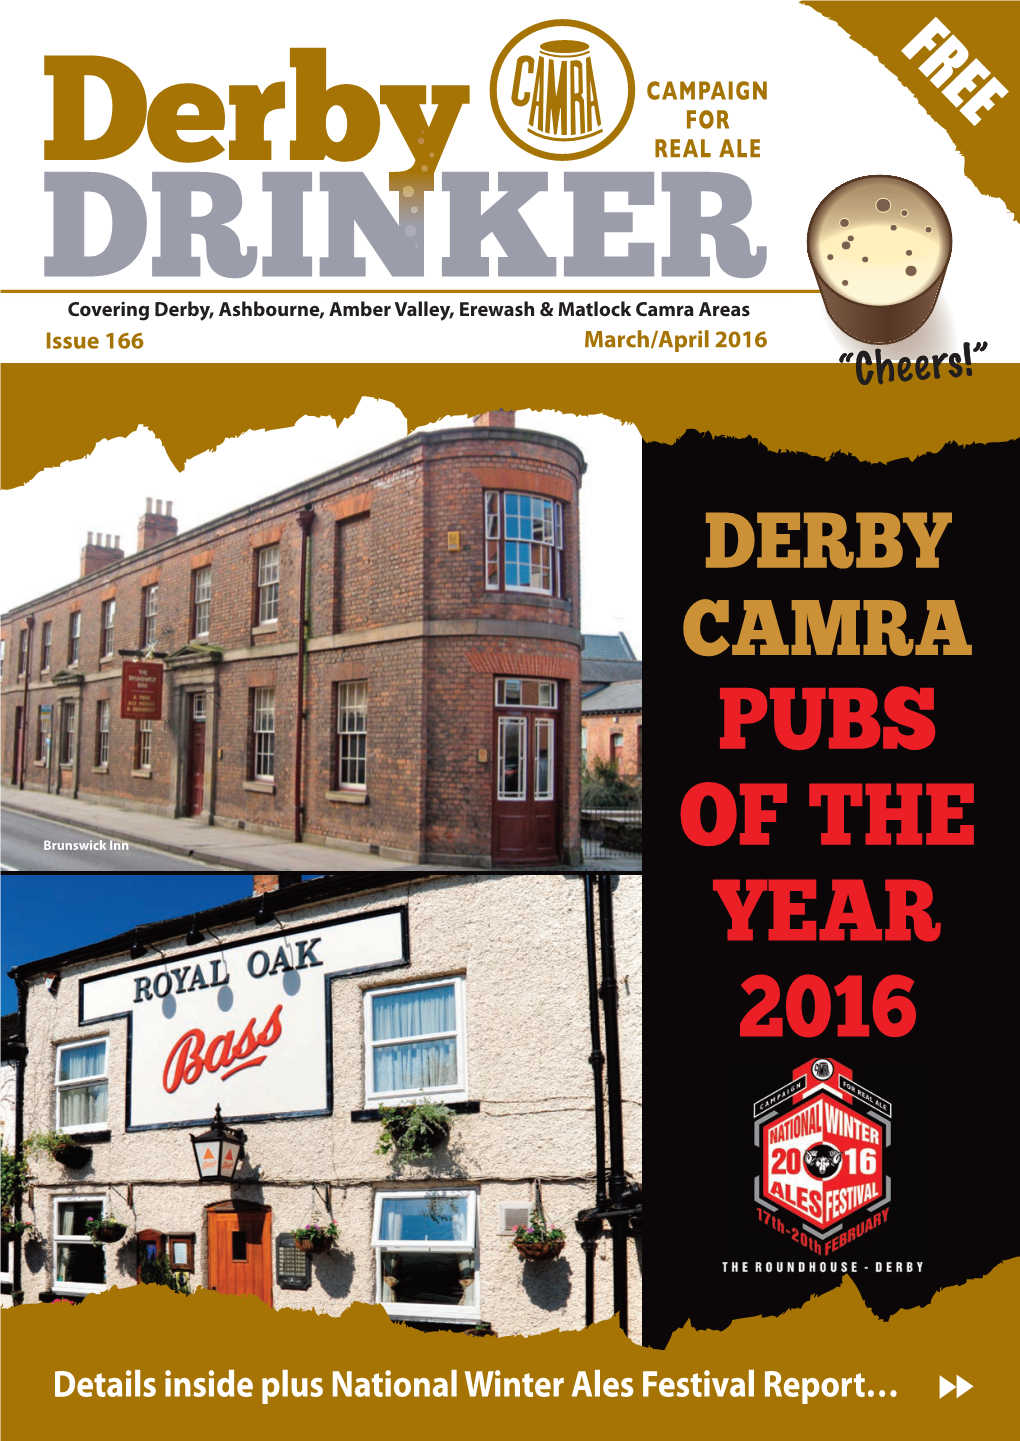 Pubs of the Year 2016